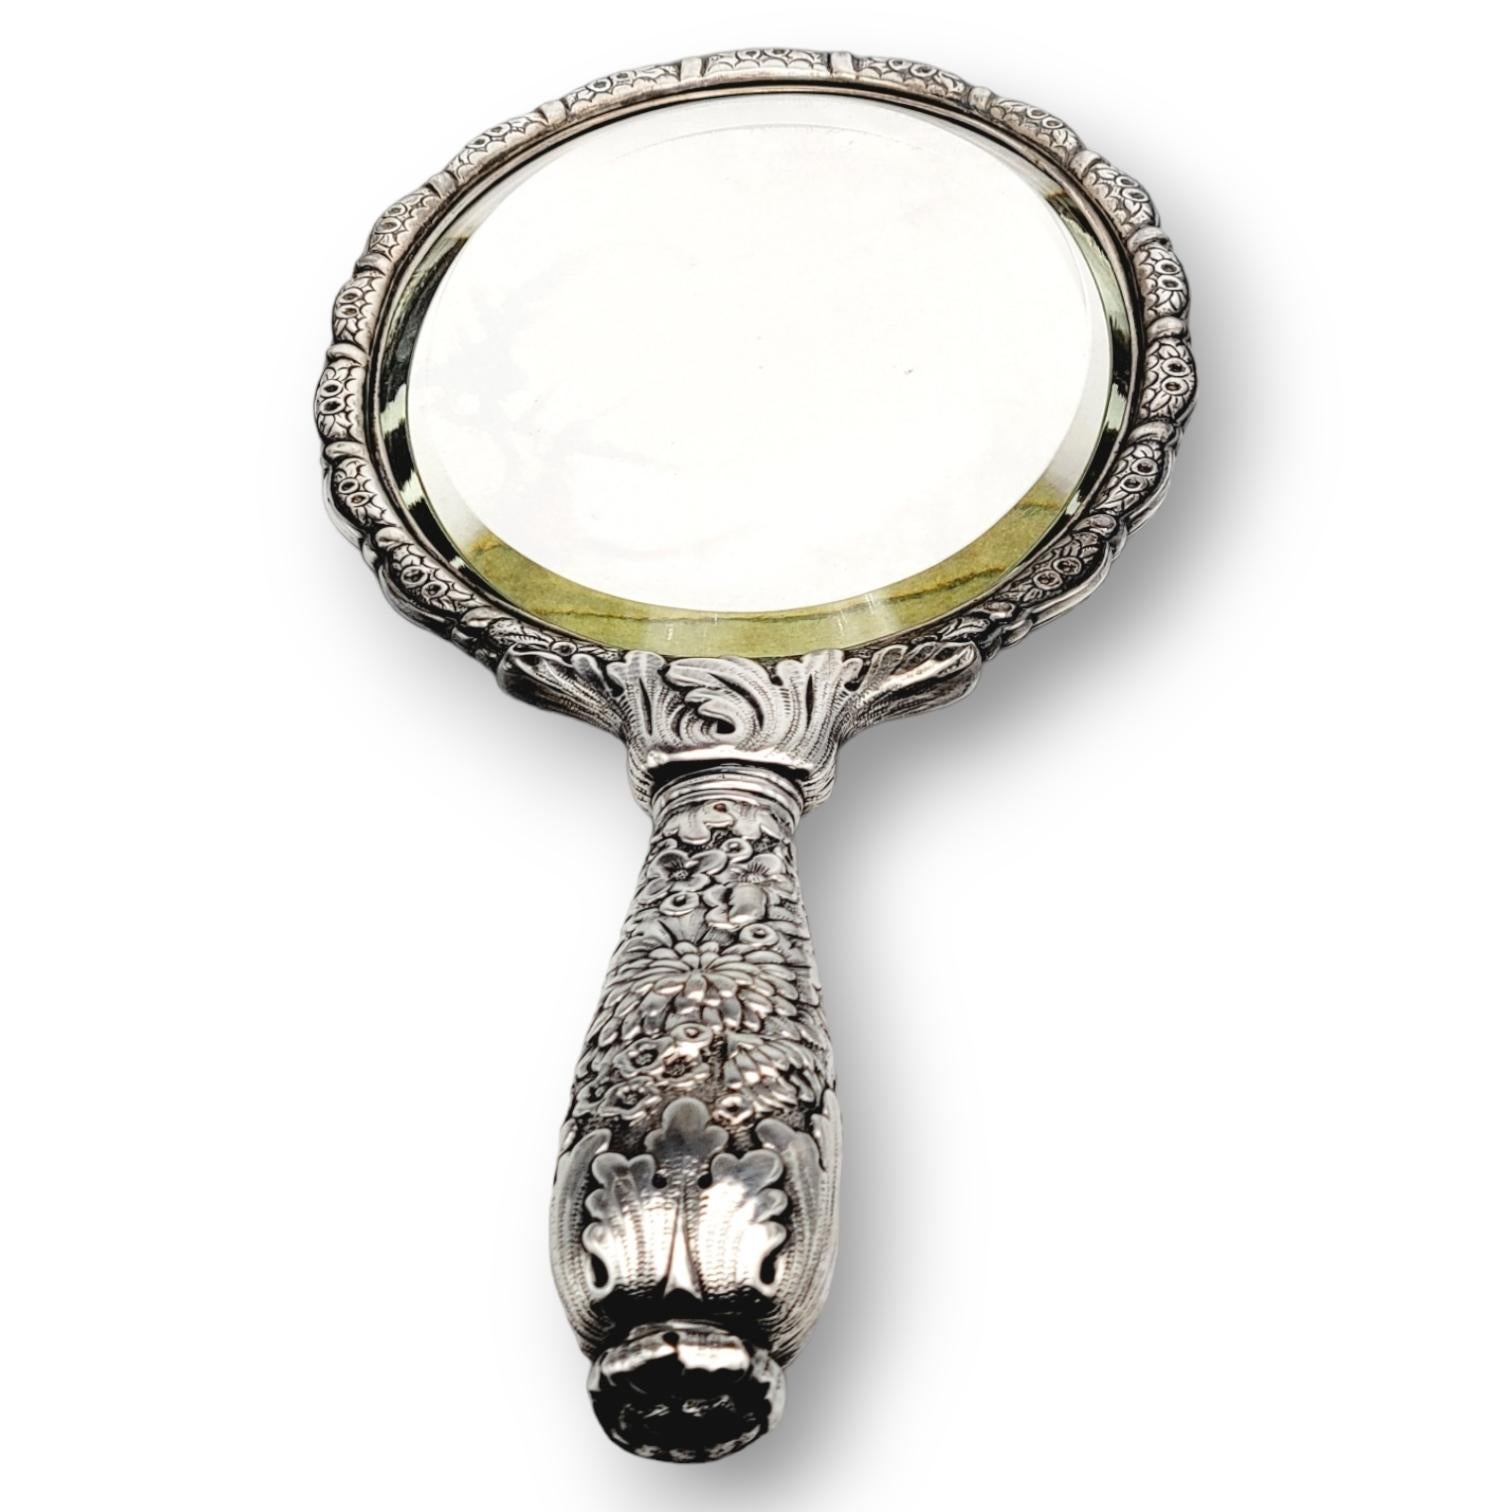 Incredibly stunning antique Tiffany & Co. hand mirror from 1870 to 1891. This exquisite piece has an intricate floral and fern repousse design covering the hand mirror from top to bottom. This mirror would be a breathtaking addition to any bedroom